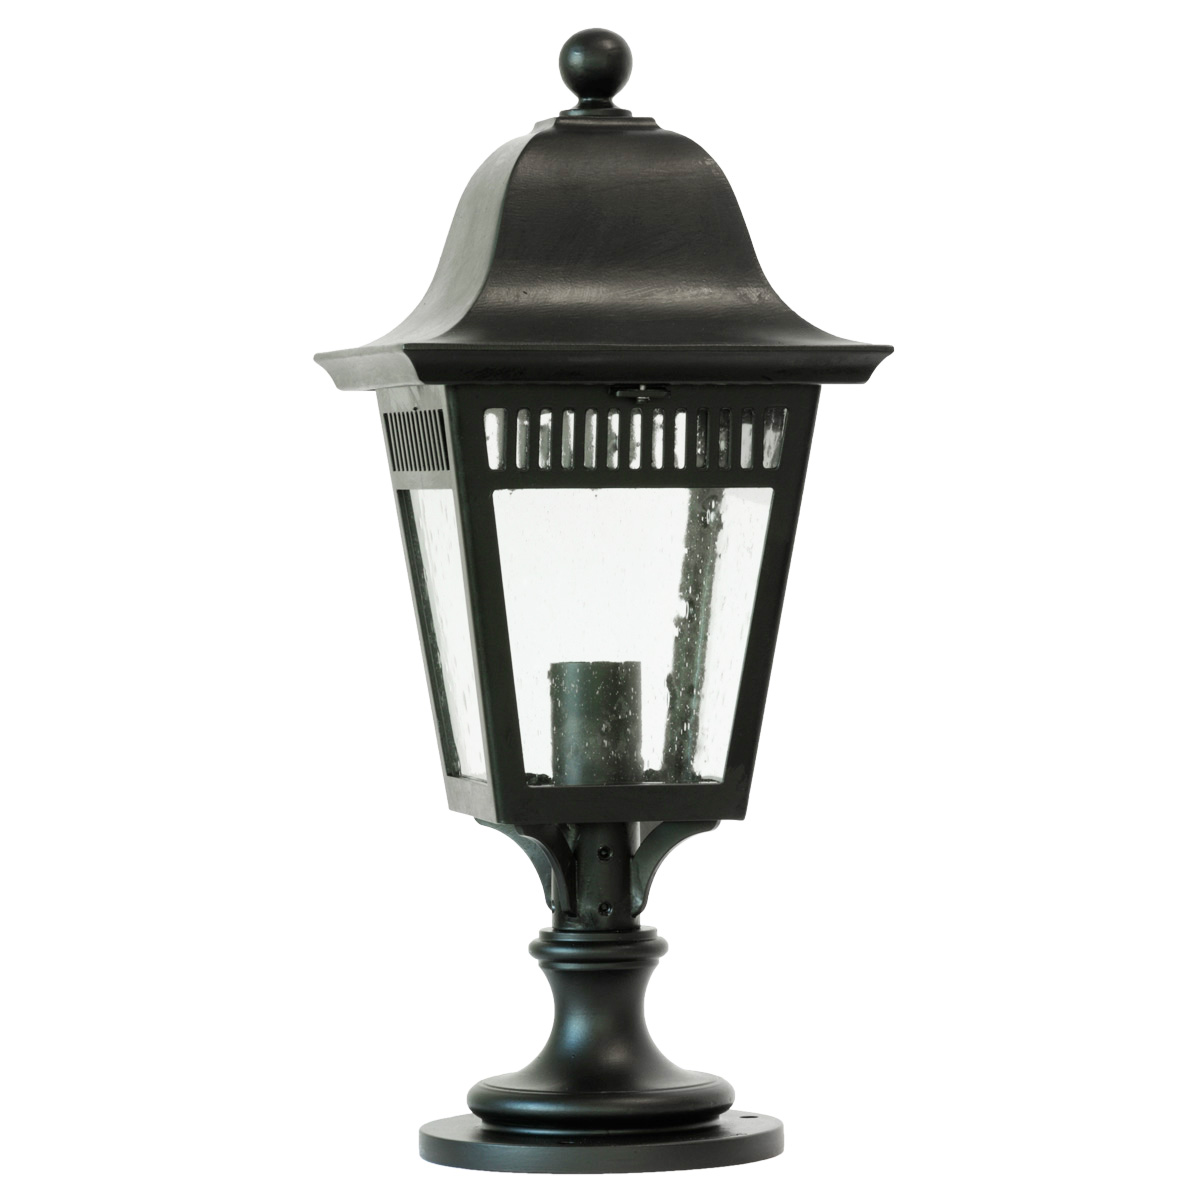 Four-sided Pedestal Light with Antique Glass AL 6838